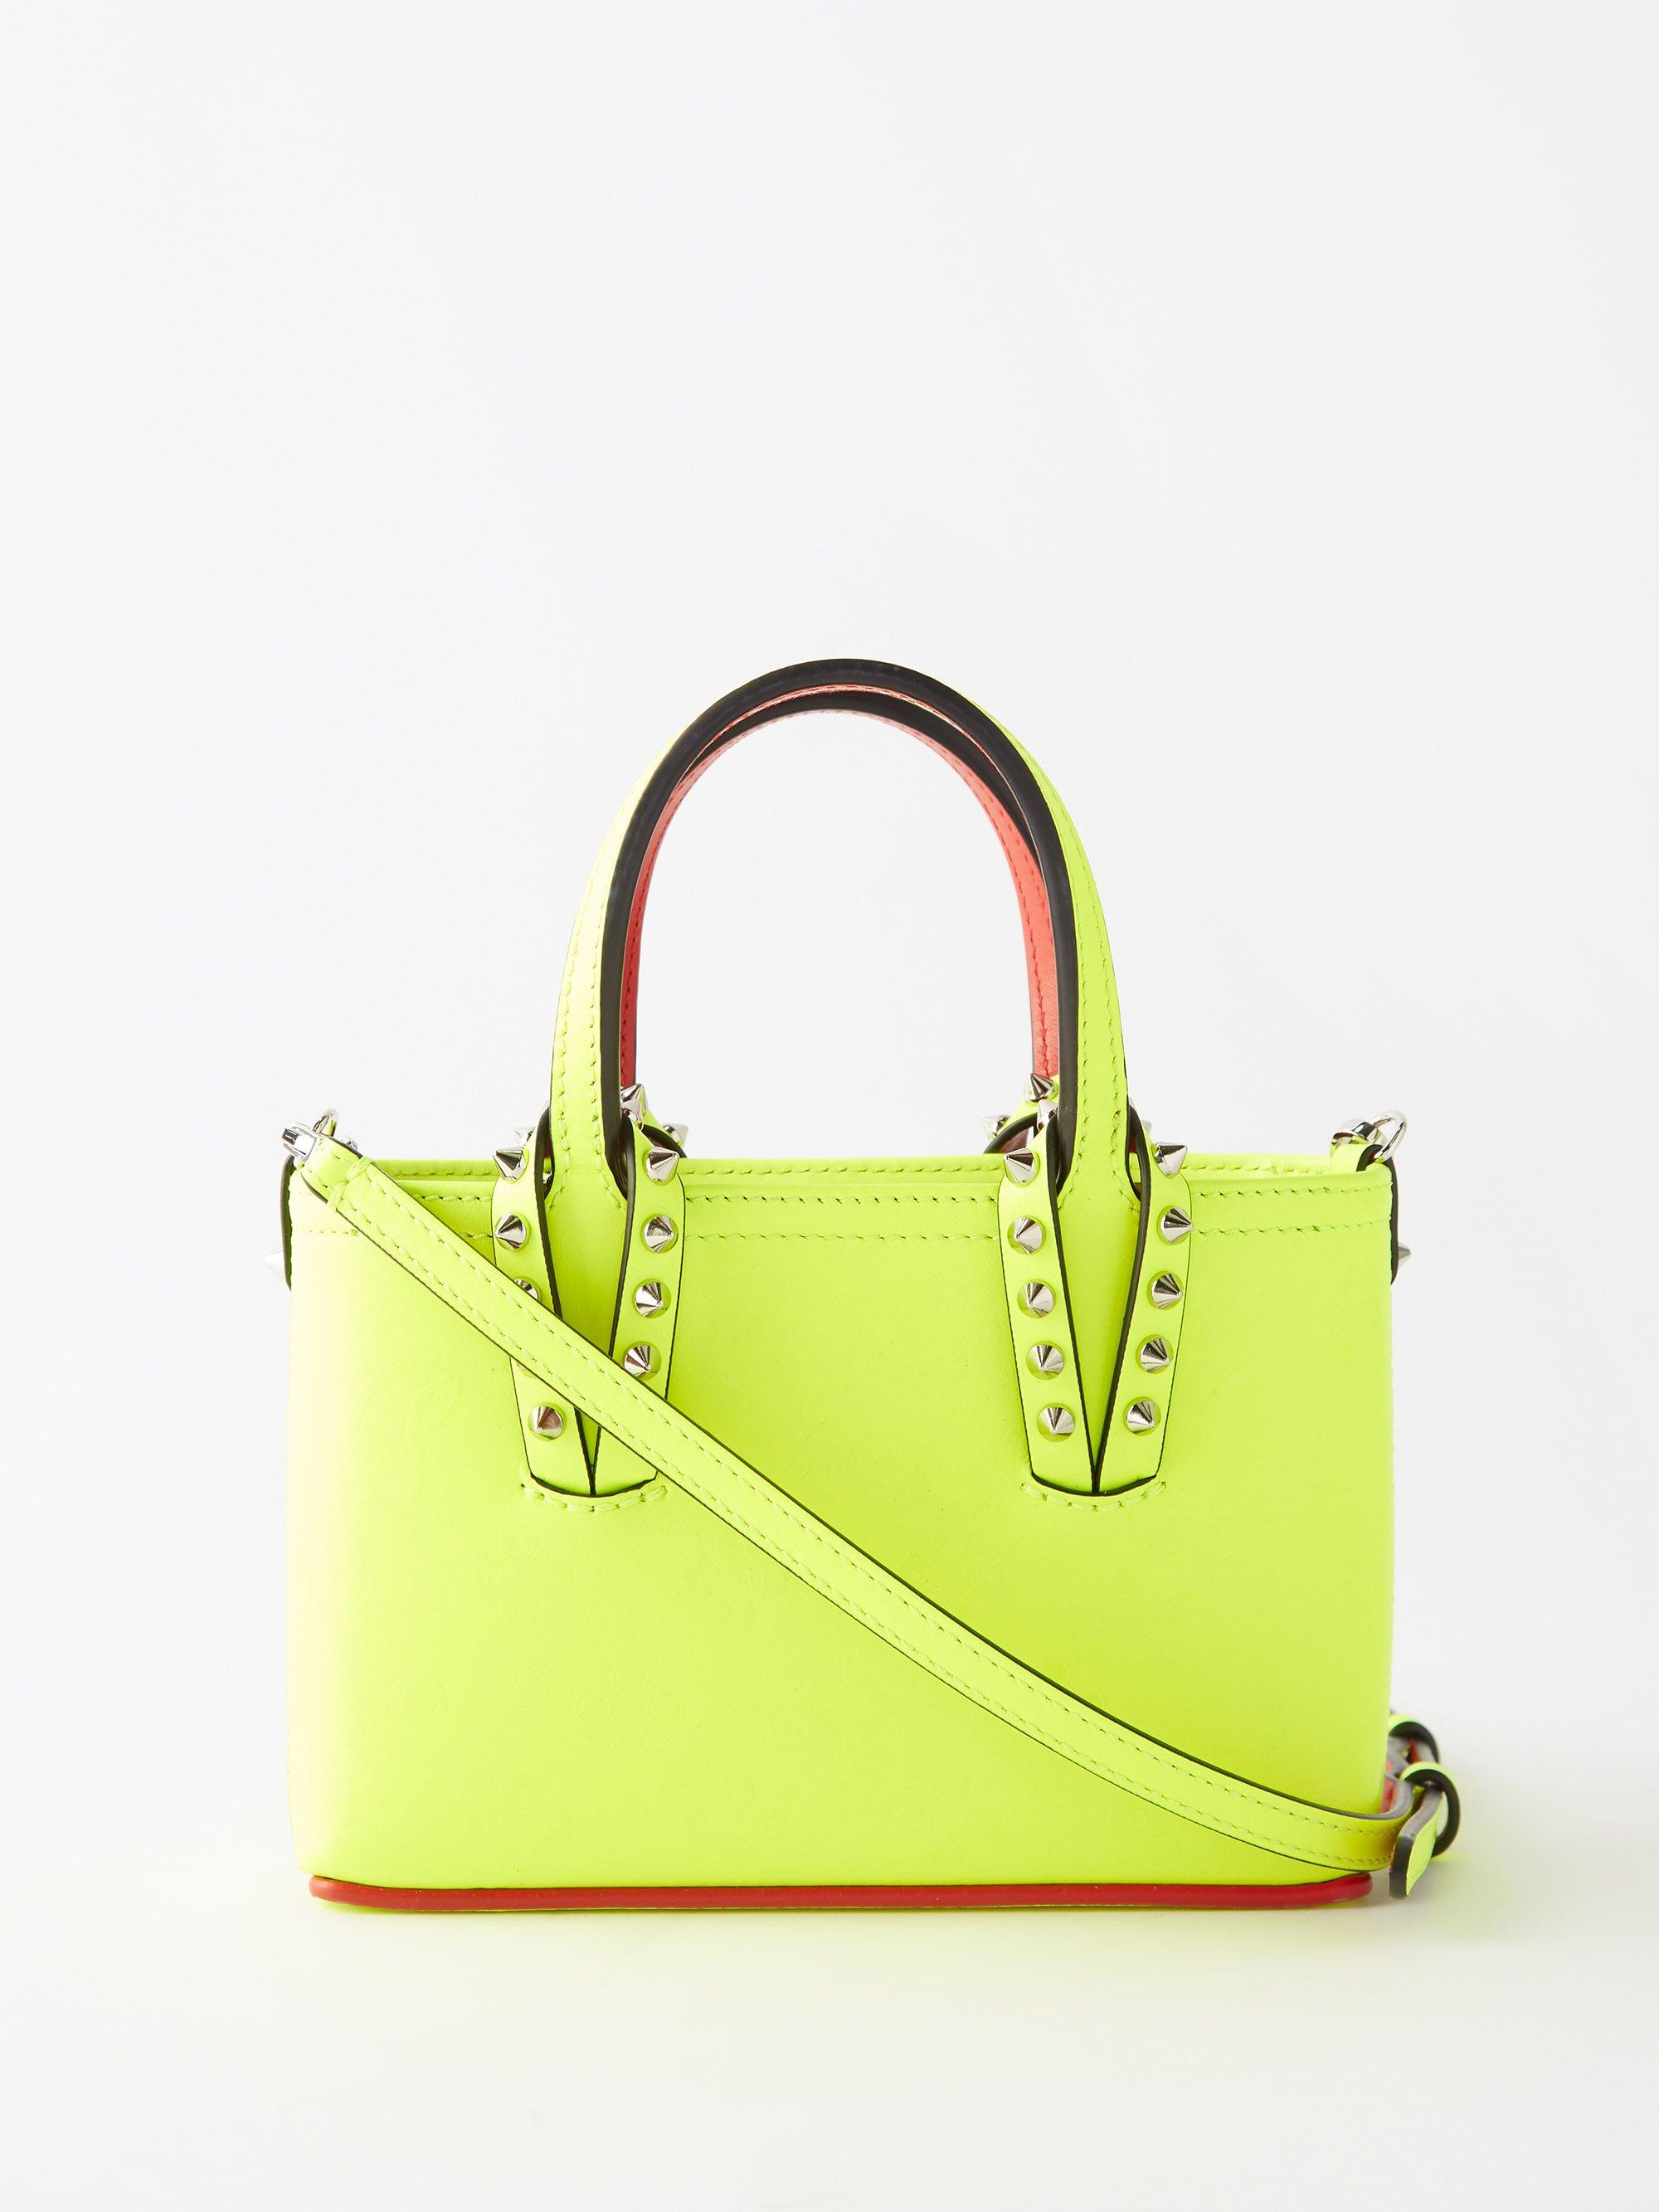 Christian Louboutin Cabata Spike-embellished Leather Cross-body Bag in  Yellow